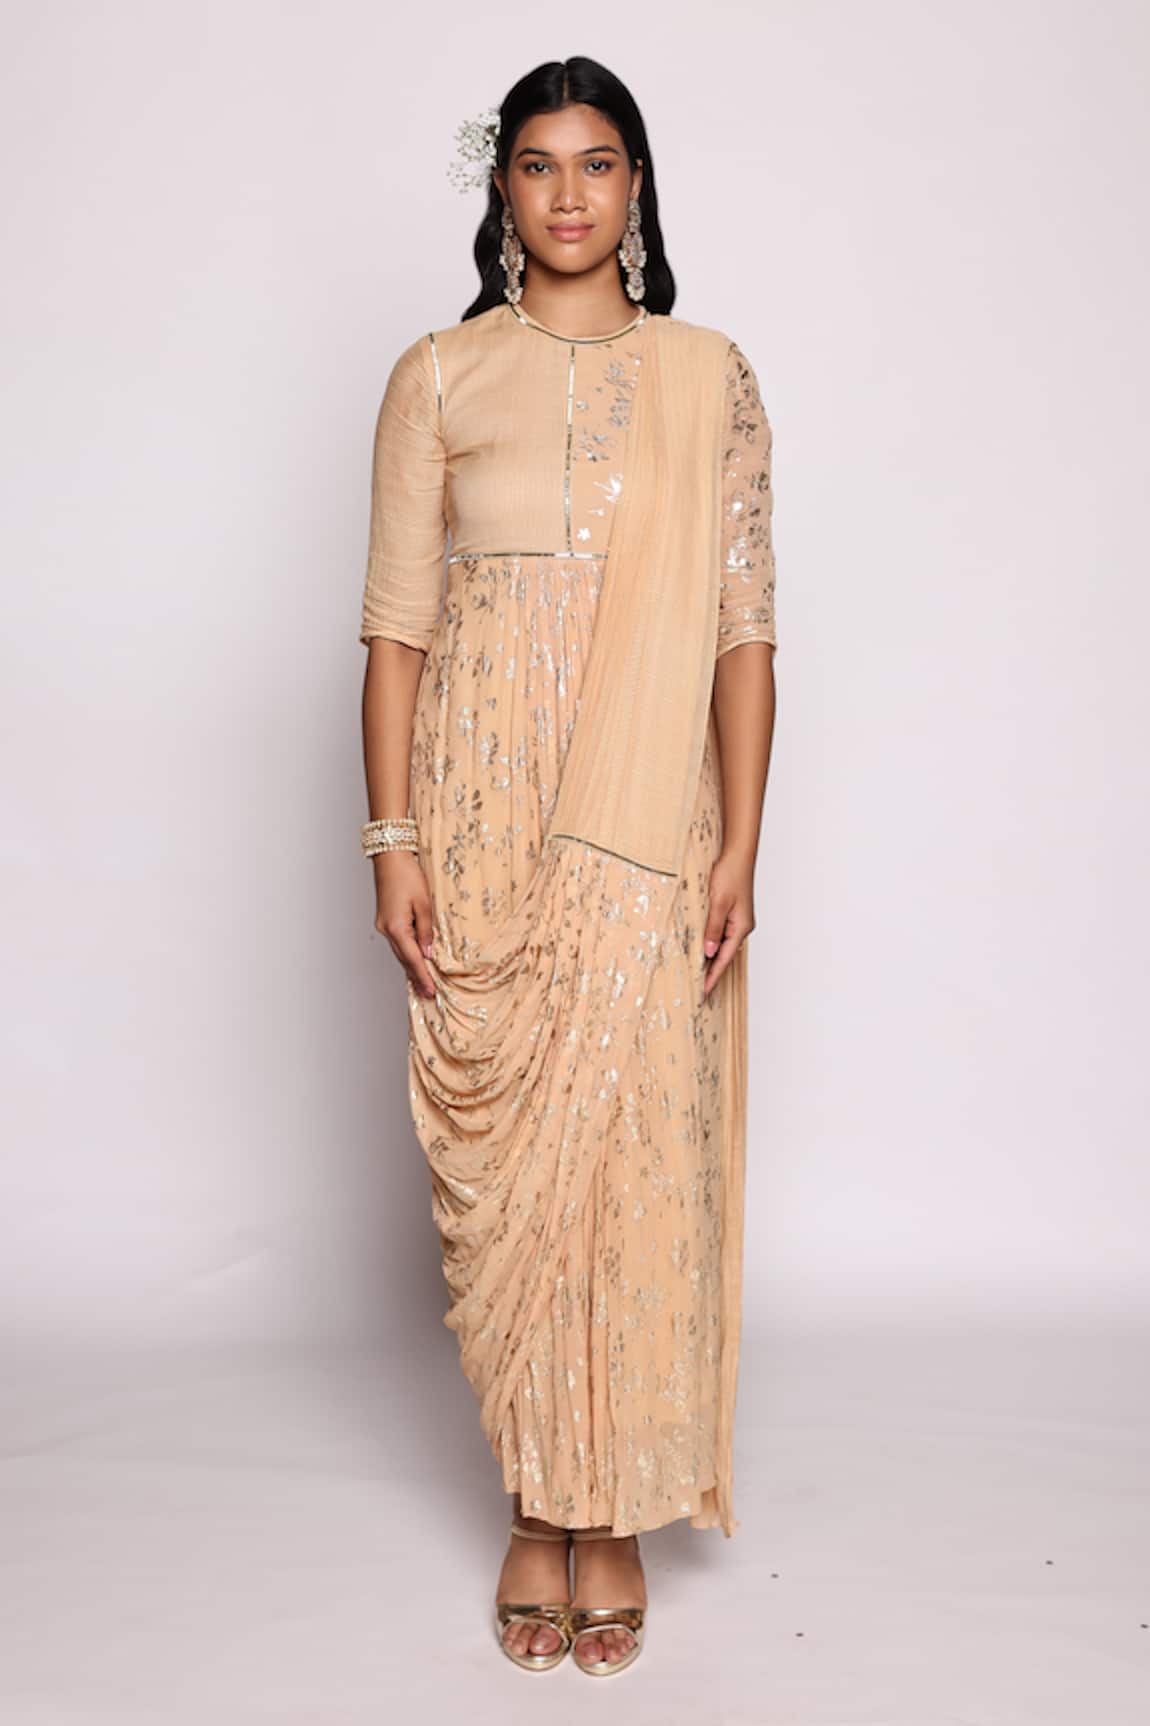 ABSTRACT BY MEGHA JAIN MADAAN Ambrosia Foil Print Embellished Draped Saree Gown